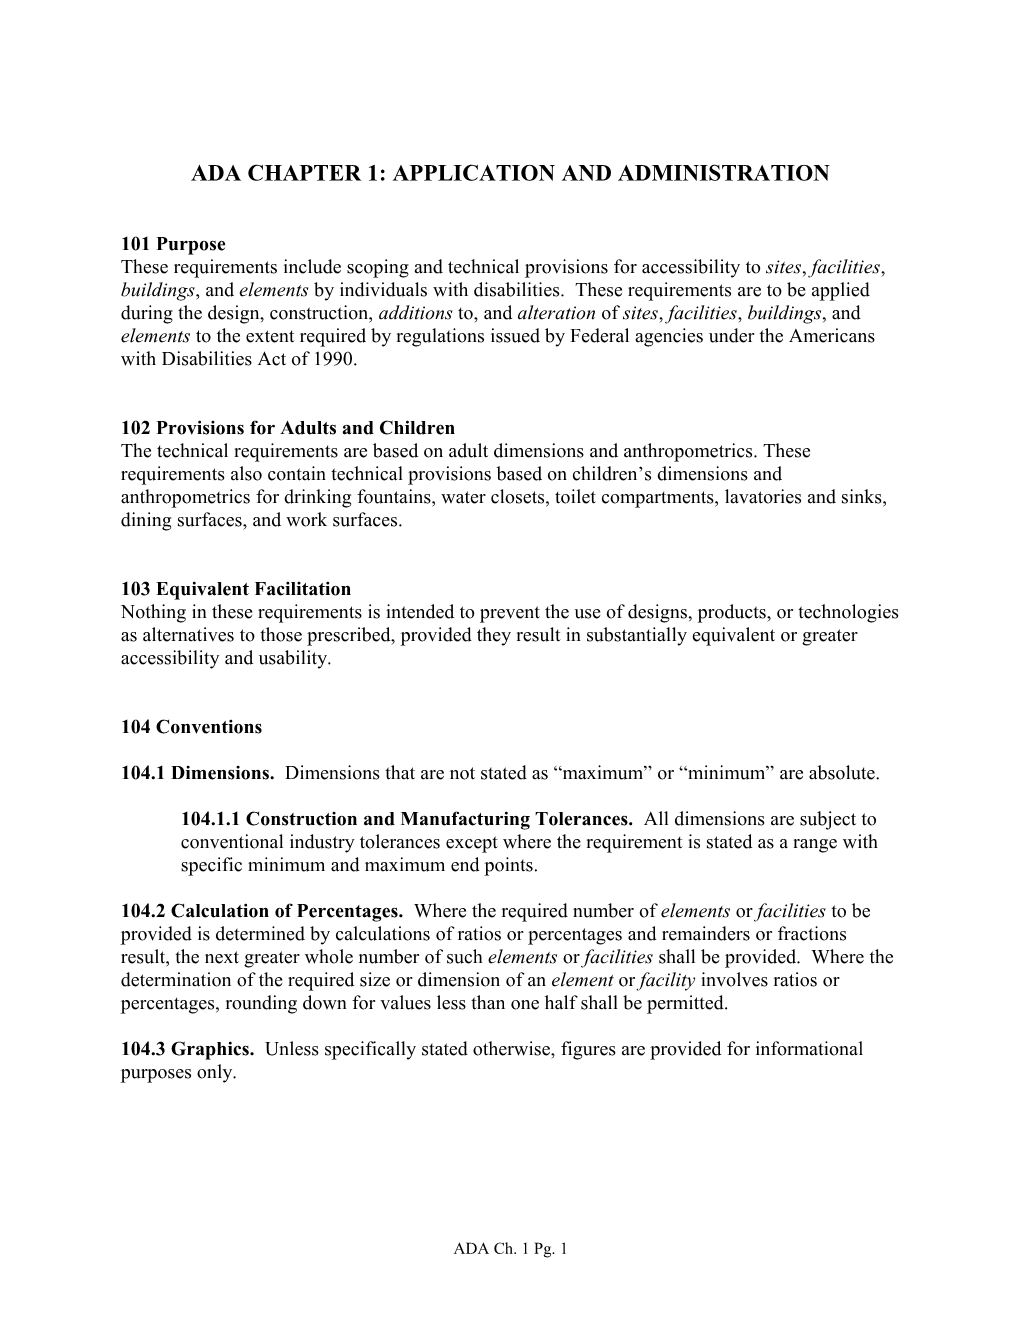 Ada Chapter 1: Application and Administration